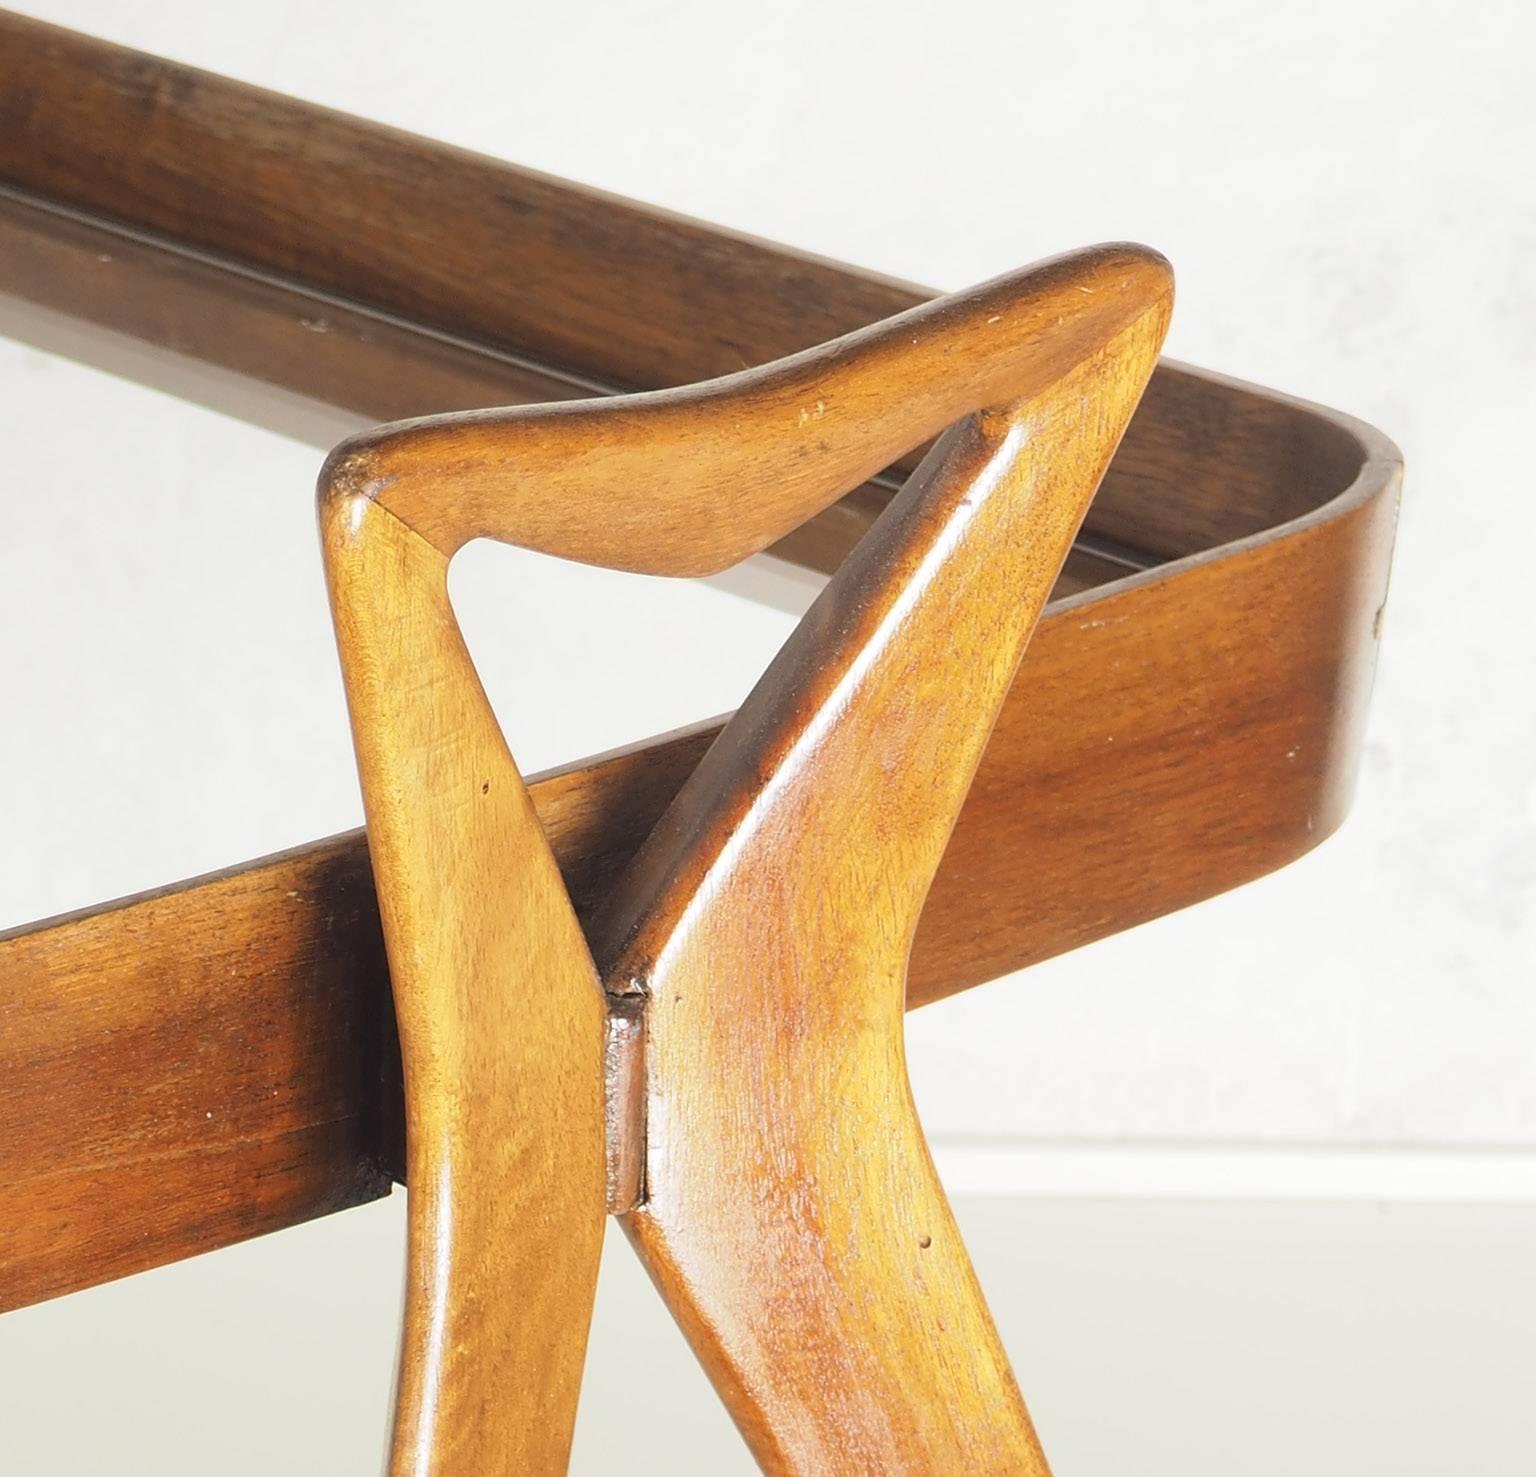 A wonderful design for this graceful and rare side table designed by Ico Parisi in 1950s.
High quality manufacture together with the best Ico Parisi design.
On the sides there are two wood moulded handles with decorative as functional use.
The